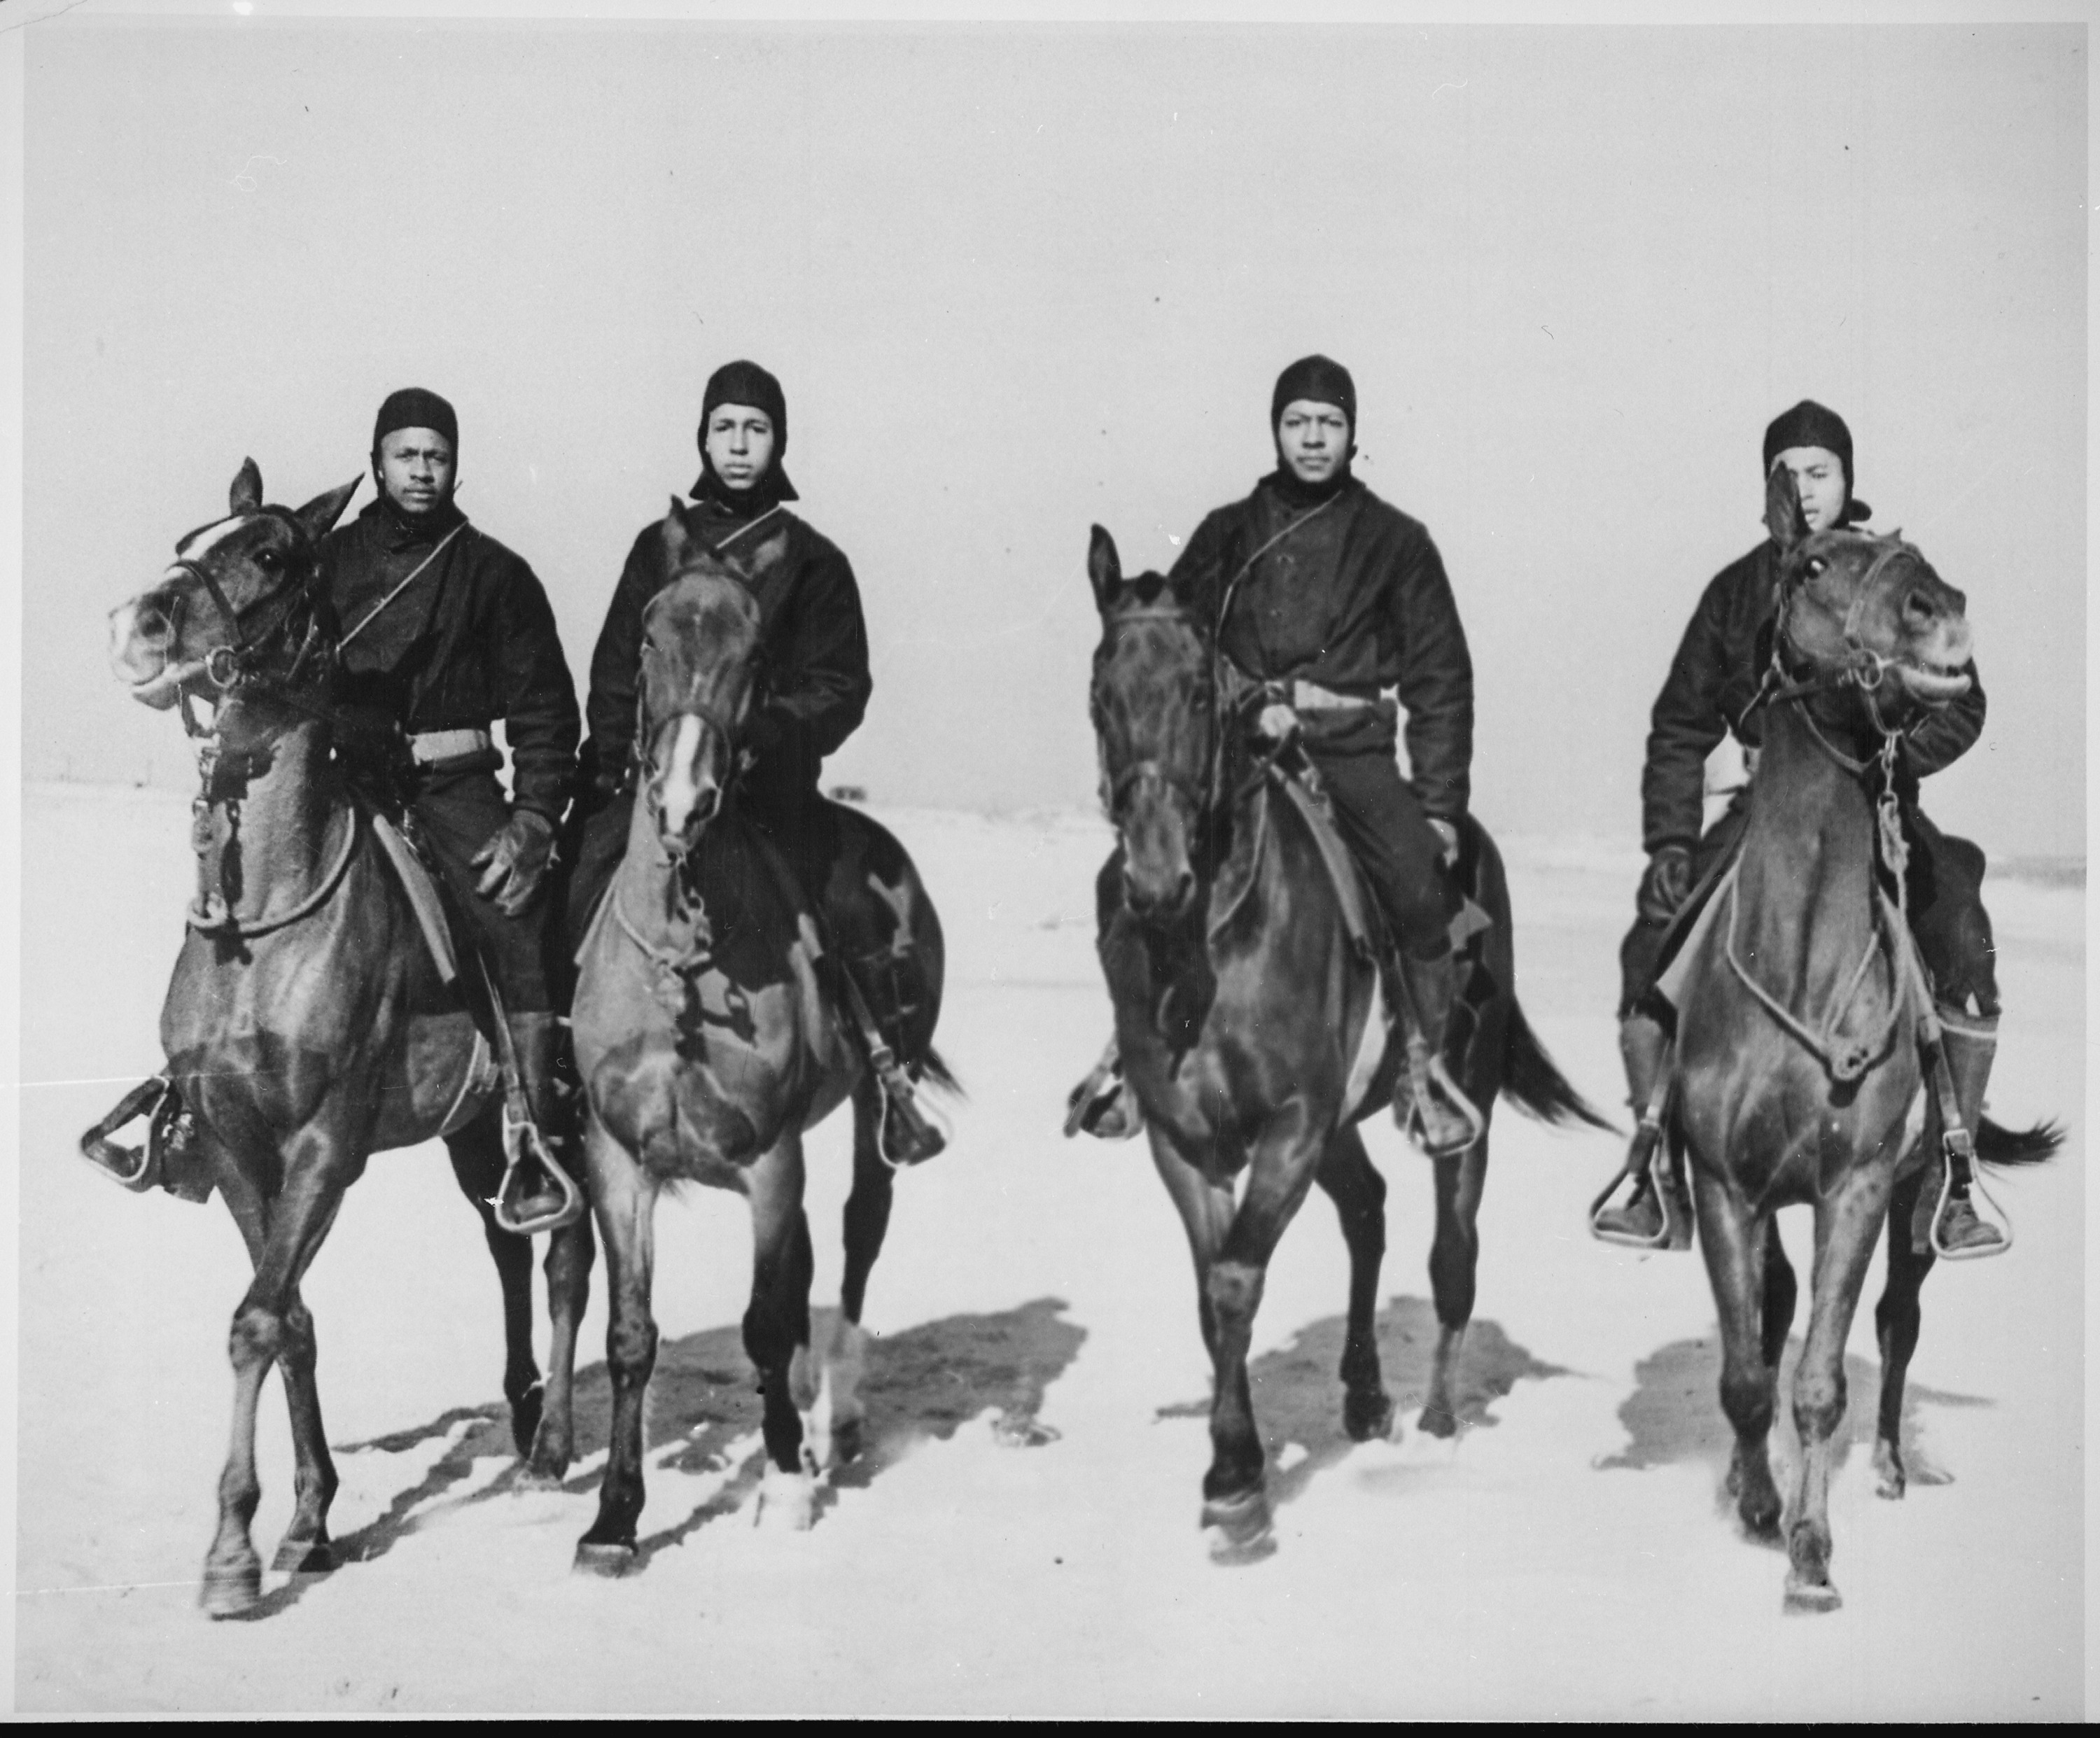 5.	Wartime beach patrols served as security forces on foot, by jeep, or on horseback and included dog patrols. Beach patrols dated back to the Coast Guard predecessor service of the U.S. Life-Saving Service of the 1800s, so the Coast Guard was the logical choice for this duty. (U.S. Coast Guard)